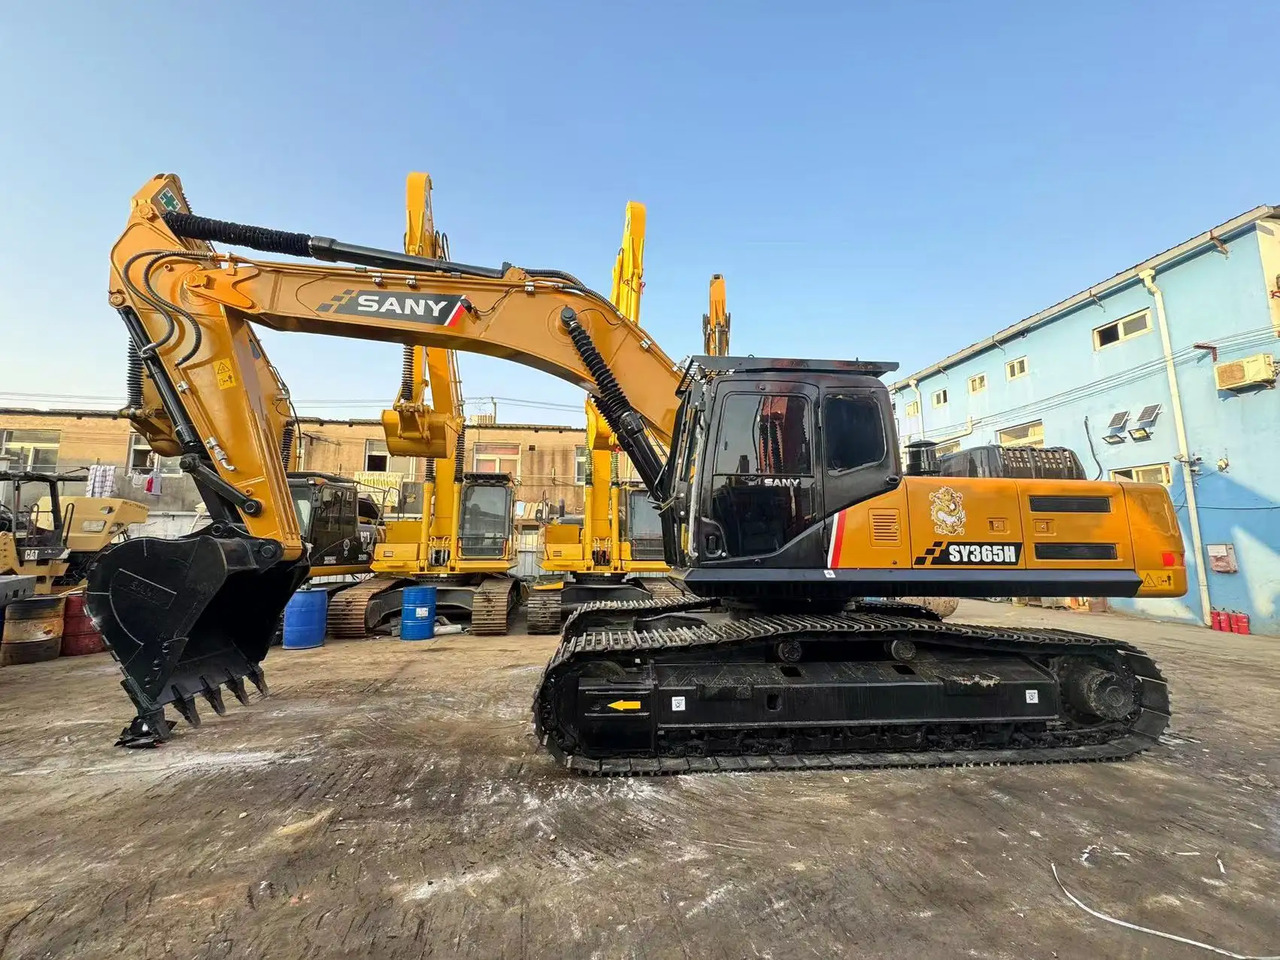 Bager gusjeničar China Manufacture Quality Digger Construction used 36 ton excavator Factory Directly Supply Excavator Sany 365H: slika Bager gusjeničar China Manufacture Quality Digger Construction used 36 ton excavator Factory Directly Supply Excavator Sany 365H